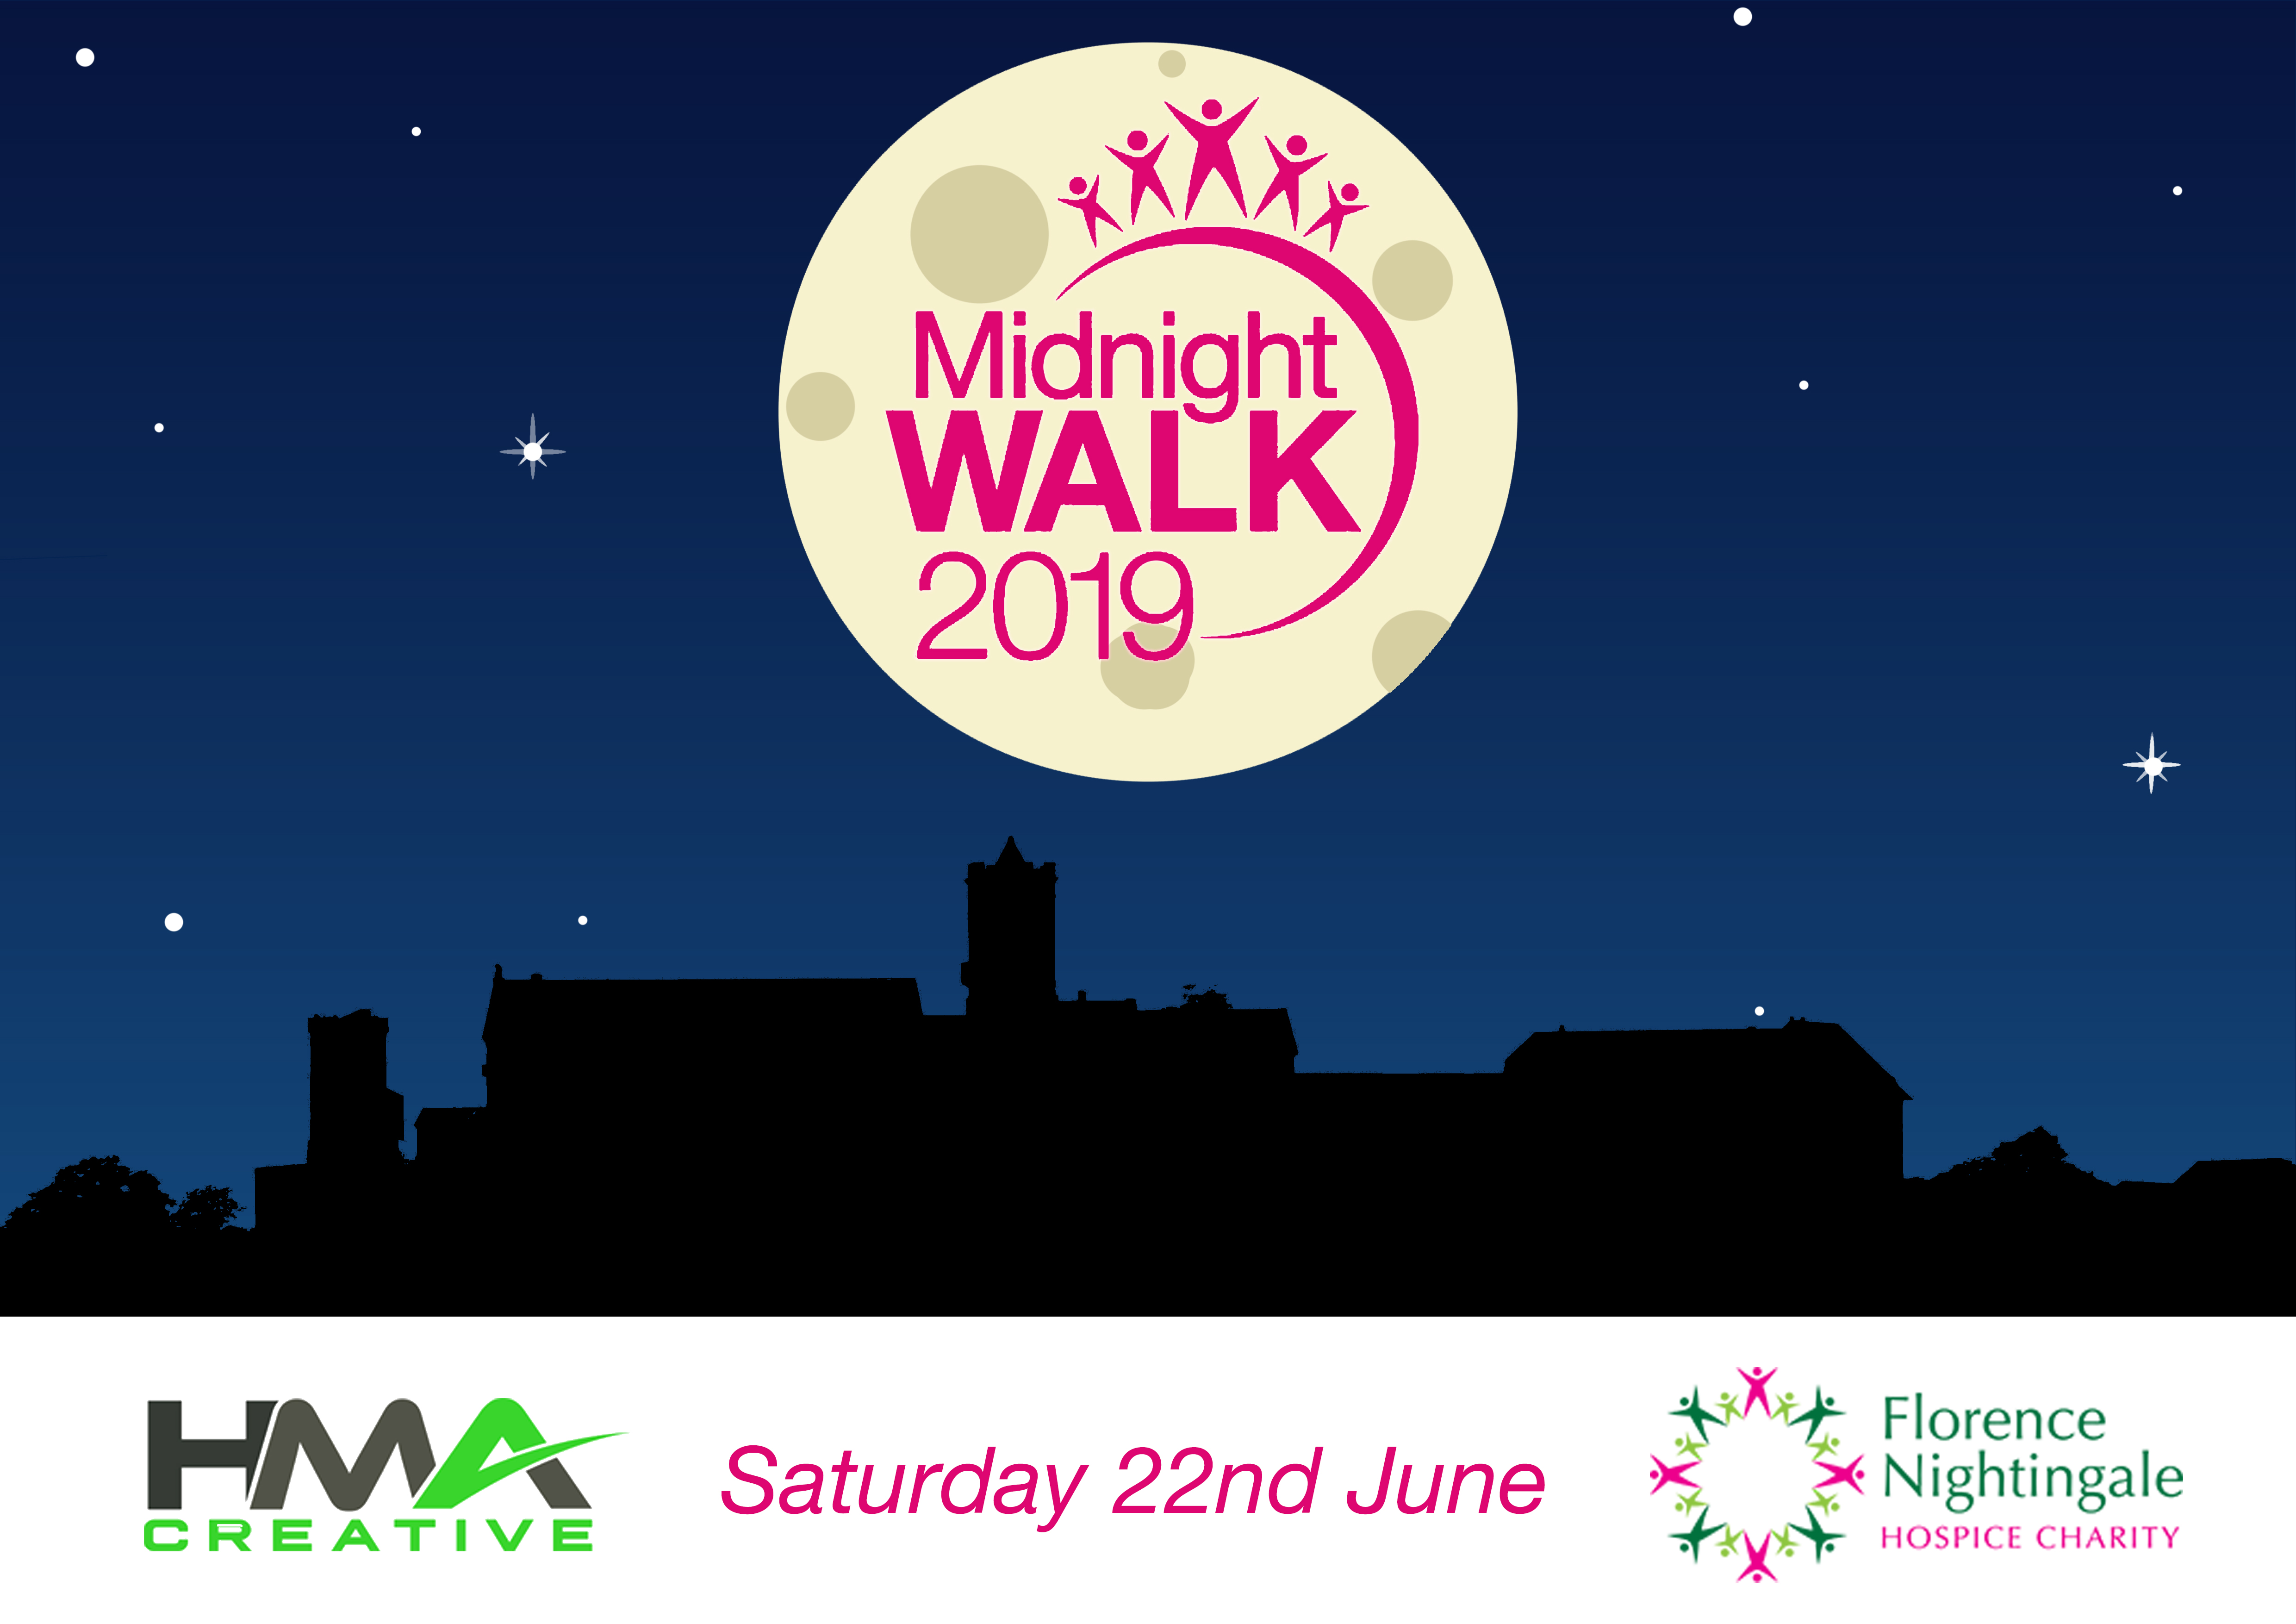 HMA Creative has come together to support Florence Nightingale Hospice by taking part in the Midnight Walk 2019